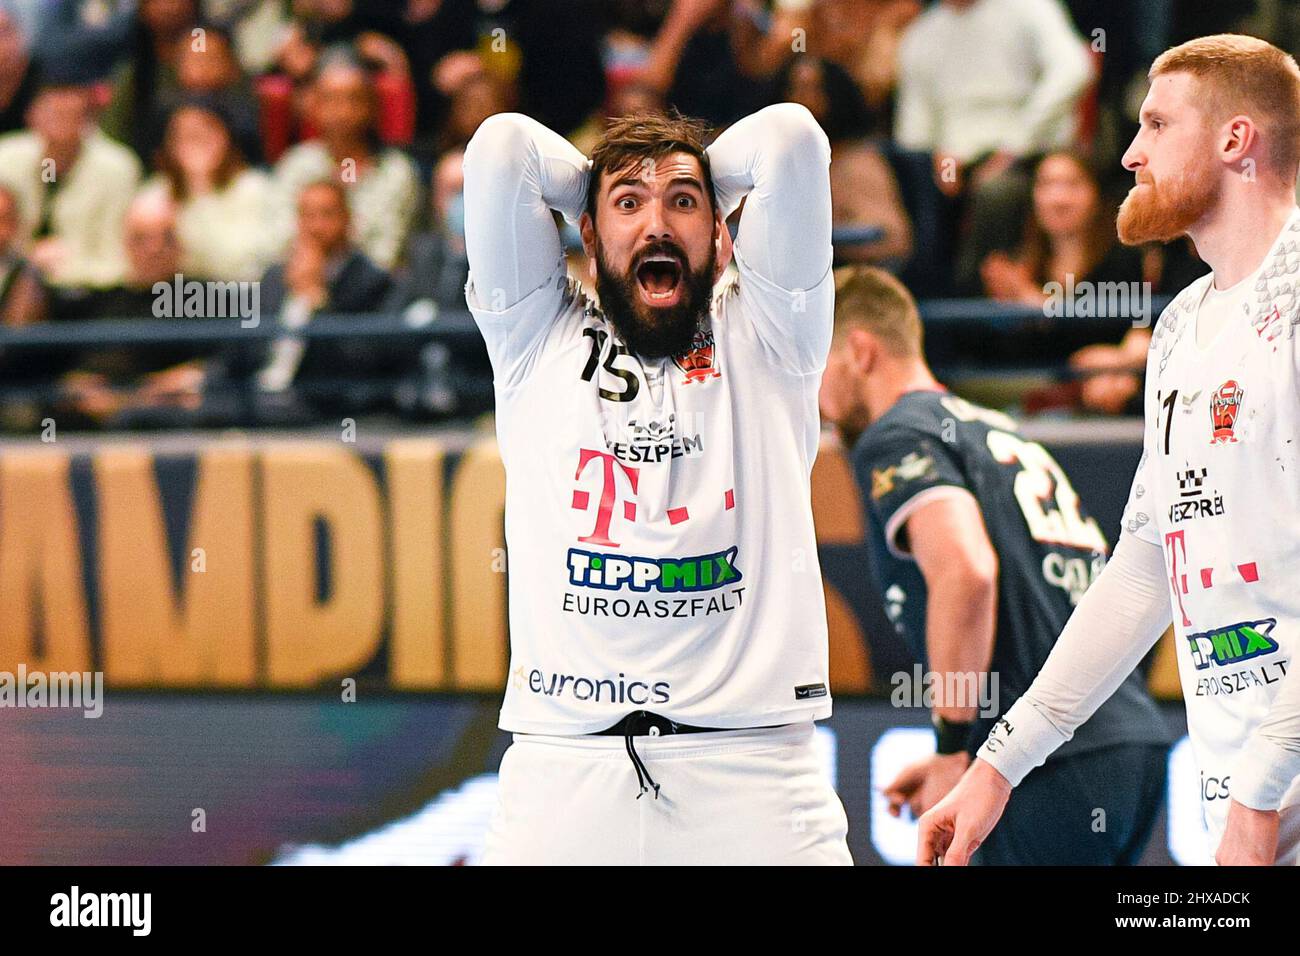 Paris, France. 10th Mar, 2022. Jorge Maqueda Peno of Telekom Veszprem reacts during the EHF Champions League, Group Phase handball match between Paris Saint-Germain (PSG) Handball and Telekom Veszprem (KSE) on March 10, 2022 at Pierre de Coubertin stadium in Paris, France. Photo by Victor Joly/ABACAPRESS.COM Credit: Victor Joly/Alamy Live News Stock Photo